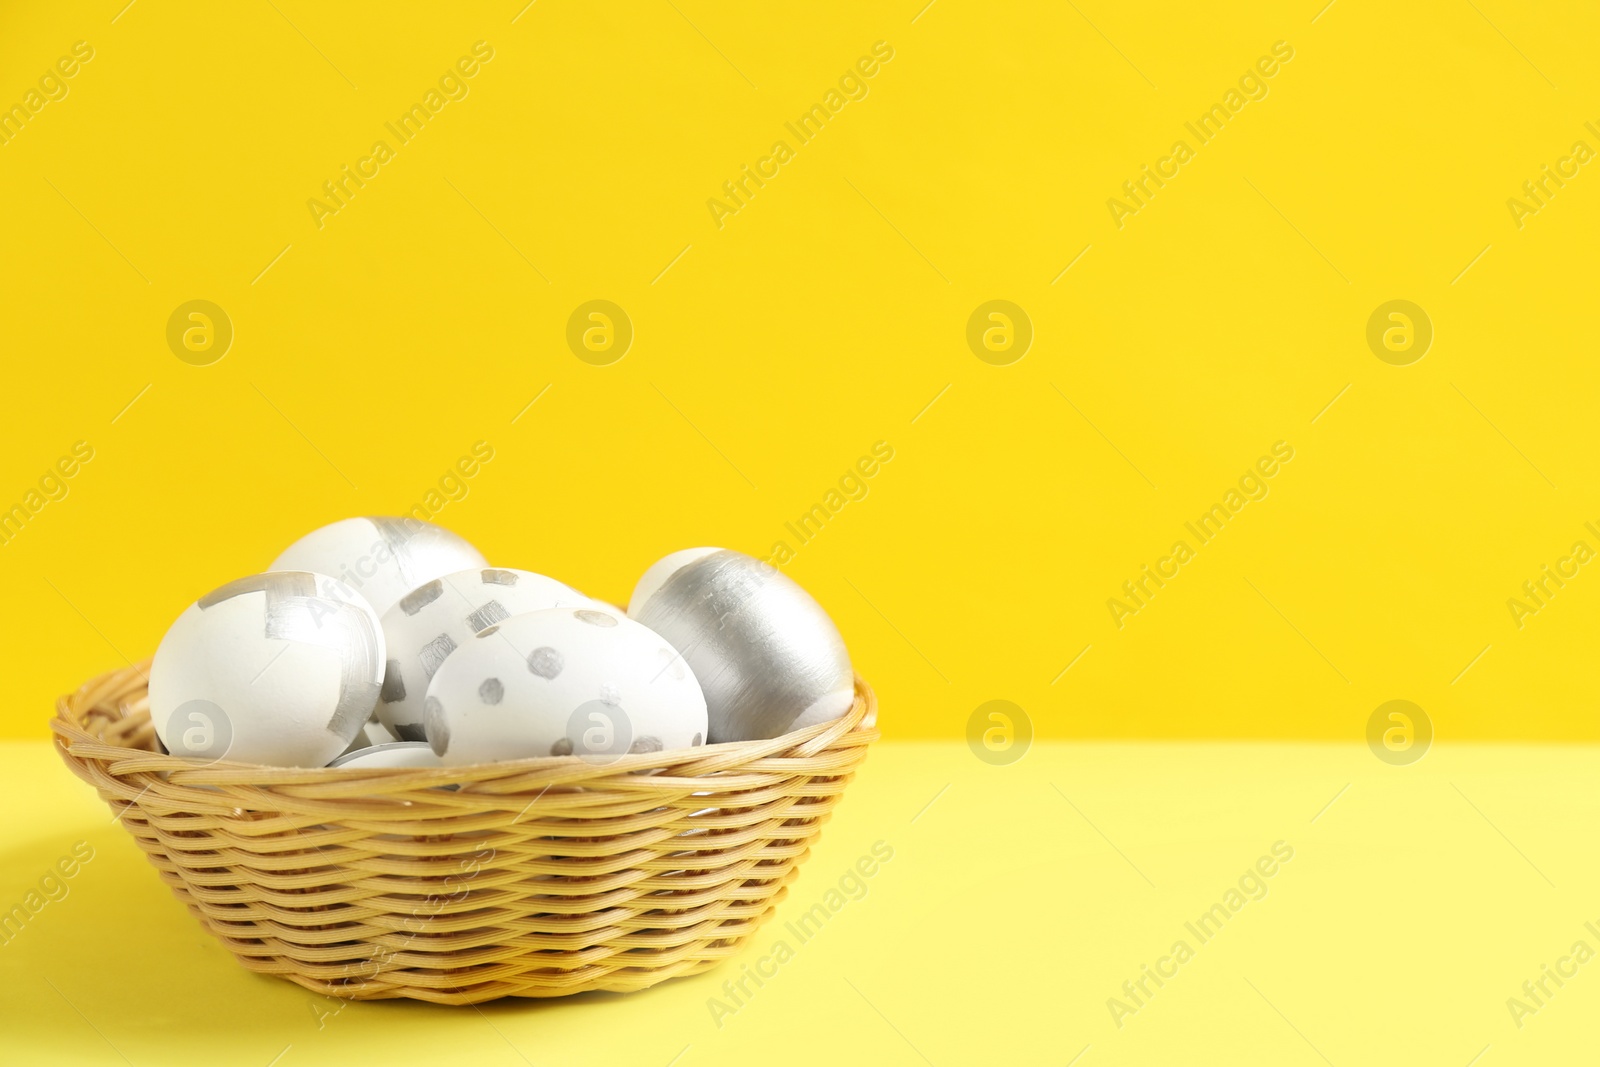 Photo of Wicker bowl of Easter eggs on table against color background. Space for text